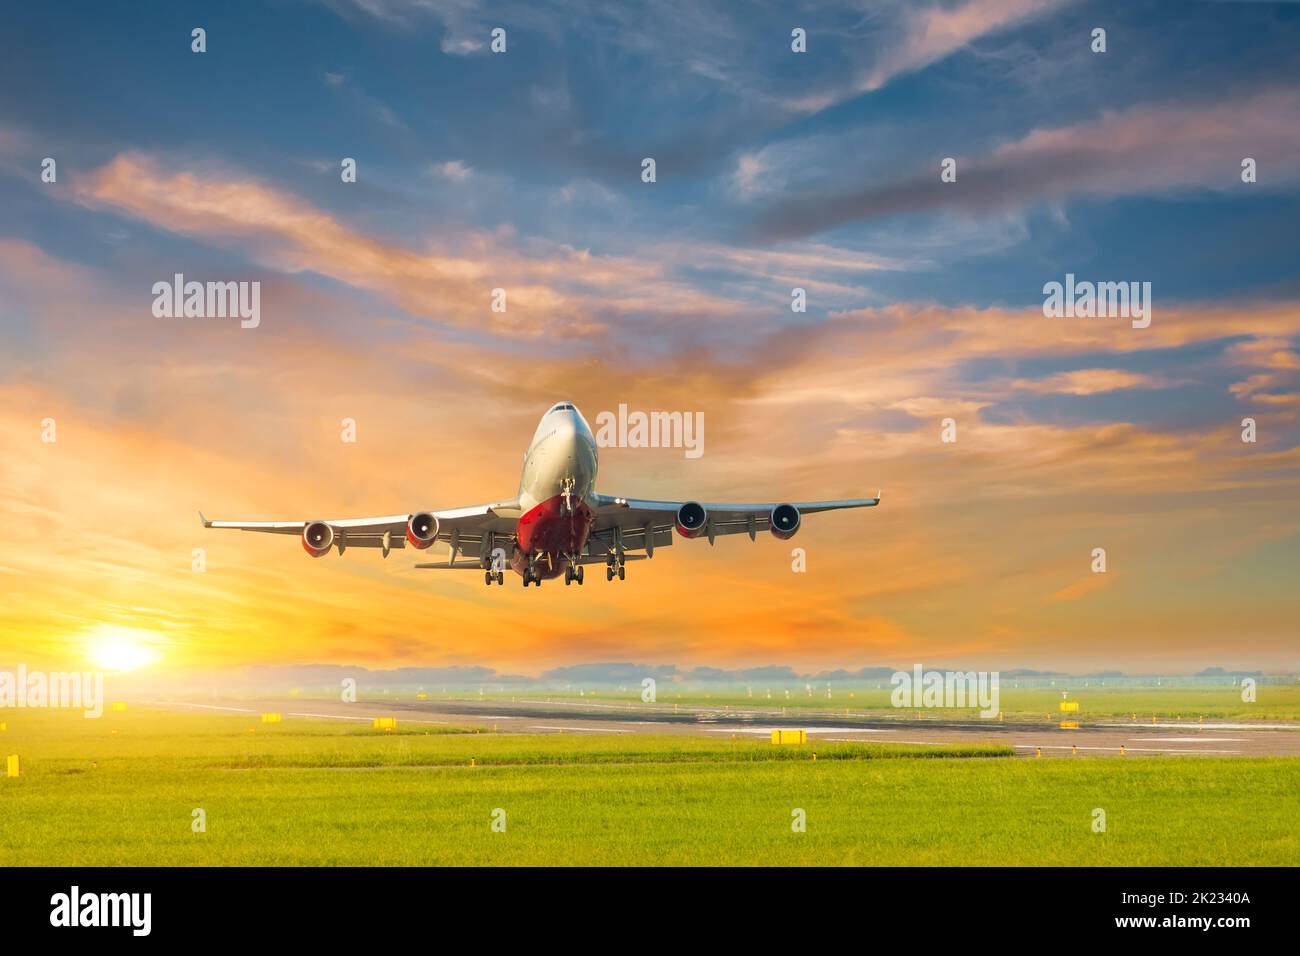 Airplane takes off during a beautiful sunset from the runway, against the backdrop of a beautiful sunset yellow sky Stock Photo